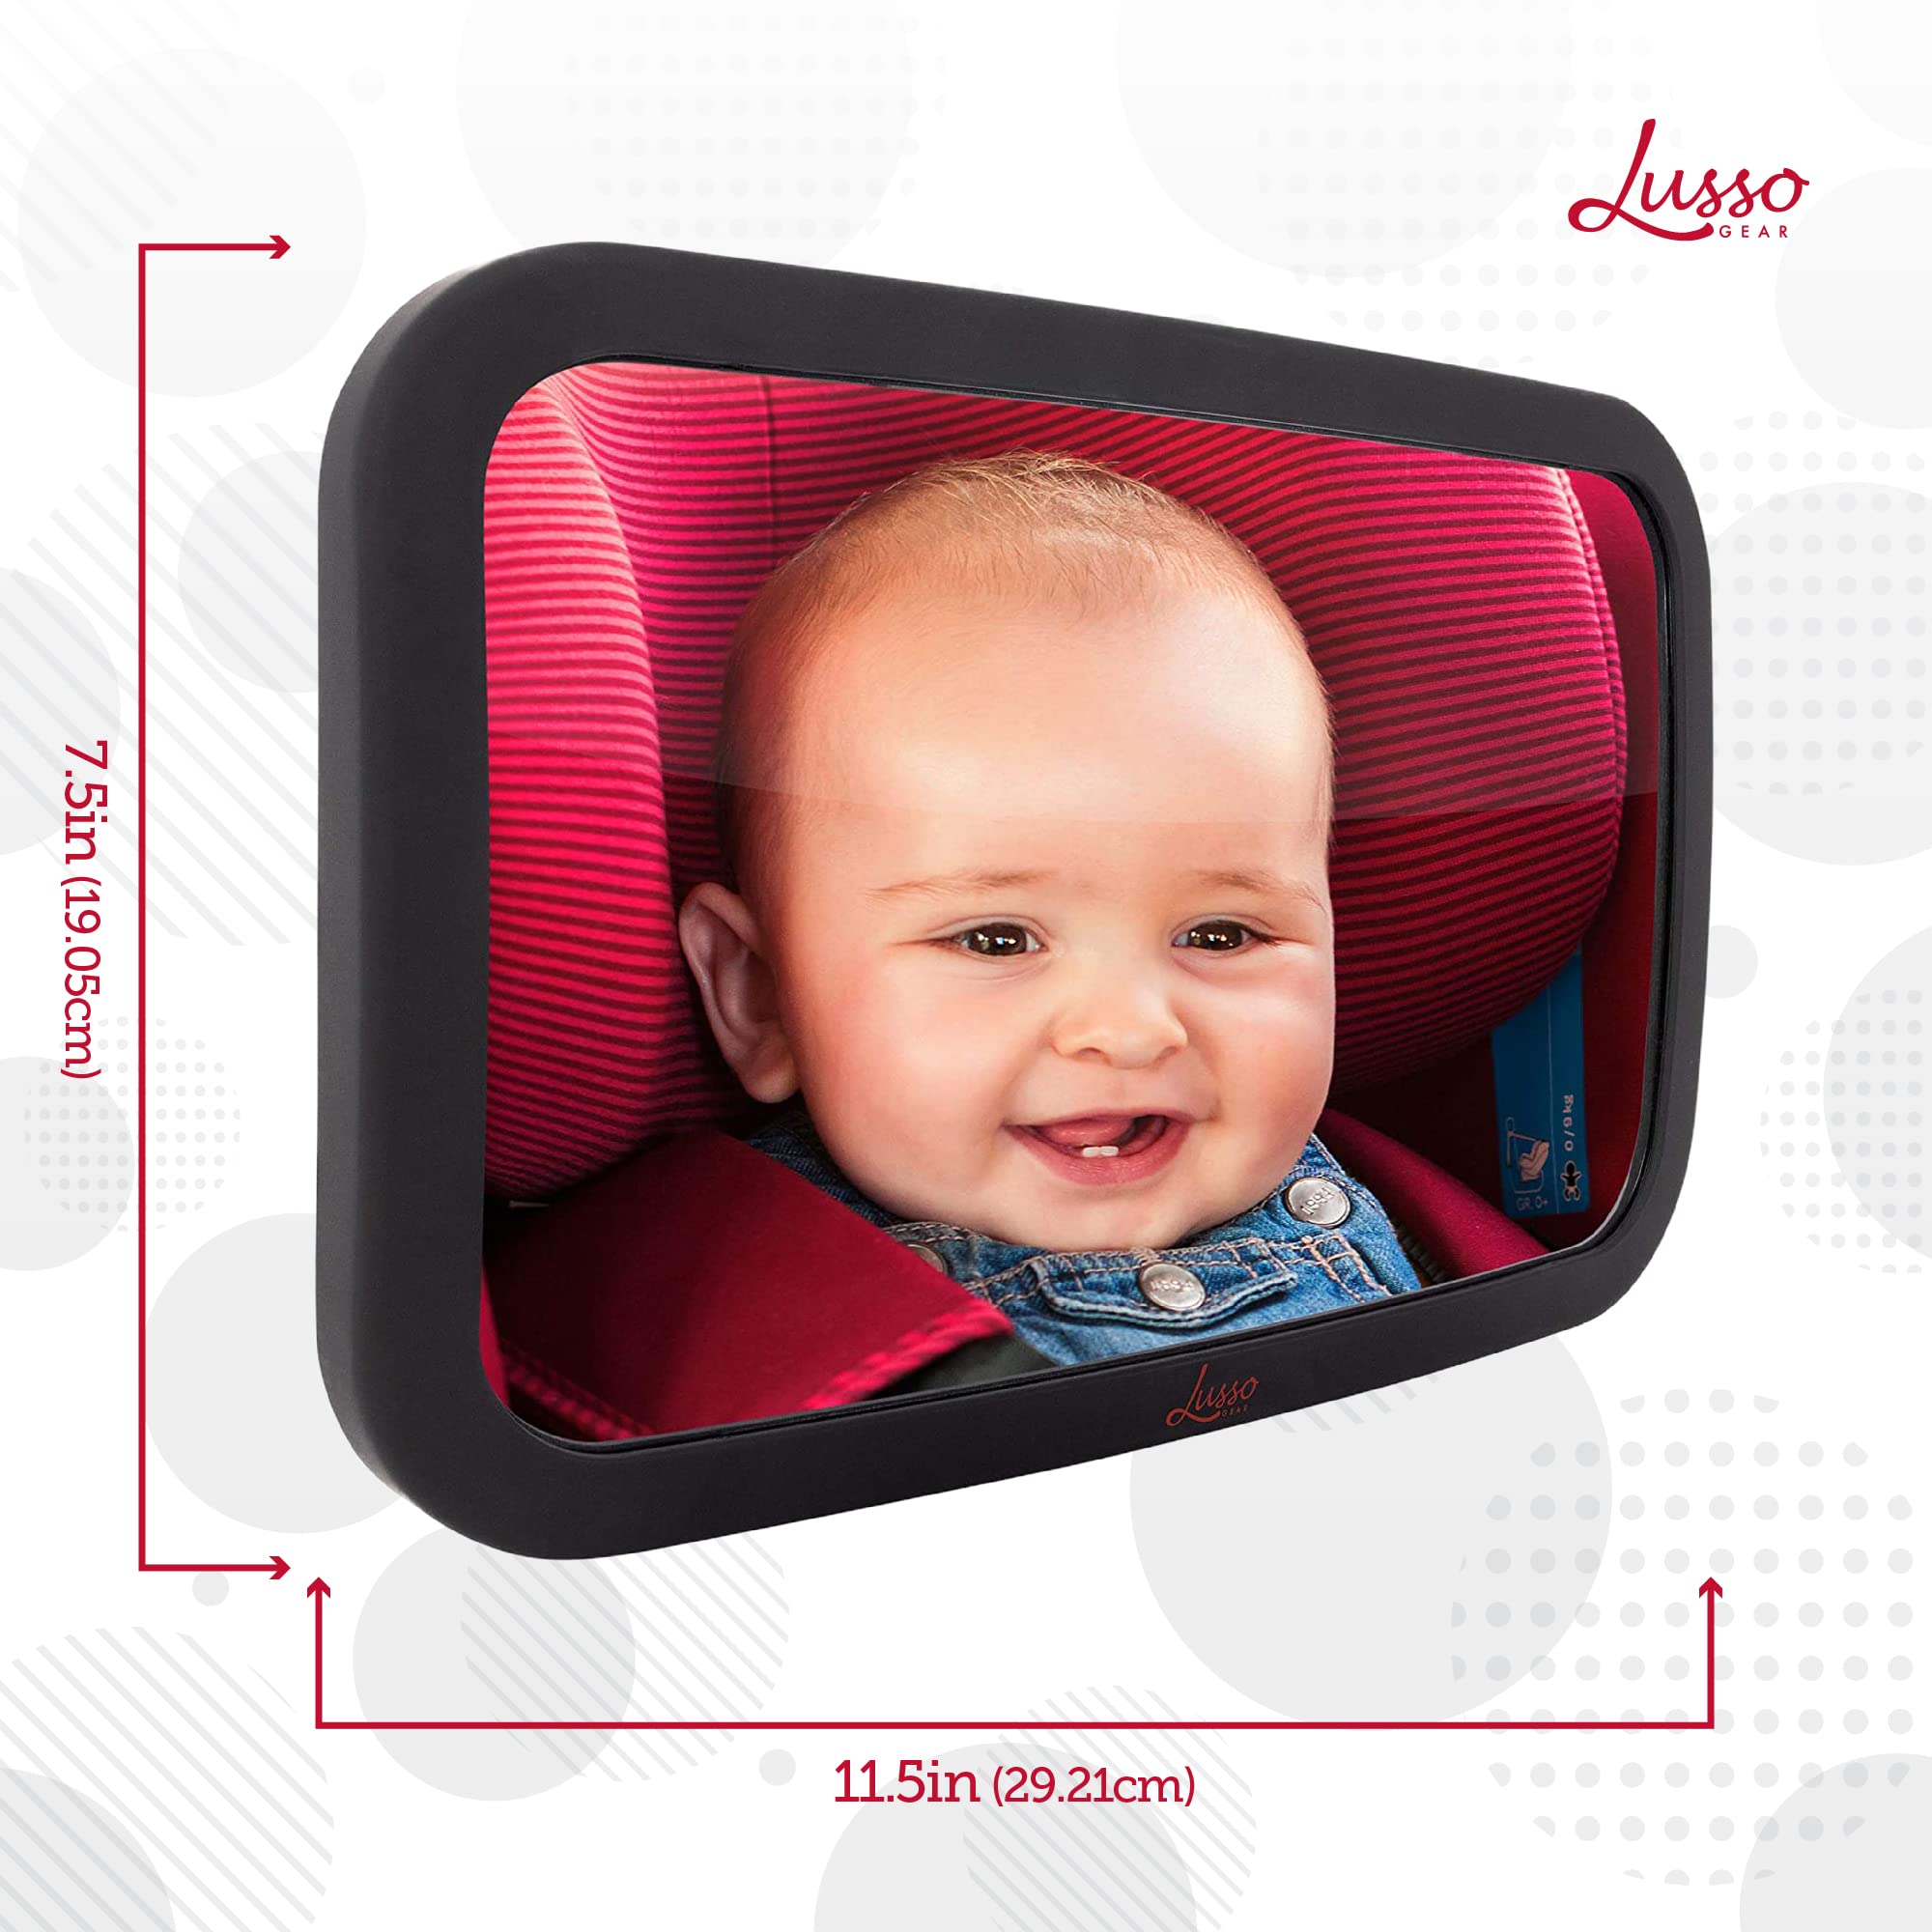 Lusso Gear Baby Backseat Mirror for Car. Largest and Most Stable Mirror with Premium Matte Finish, Crystal Clear View of Infant in Rear Facing Car Seat - Secure and Shatterproof (Black)